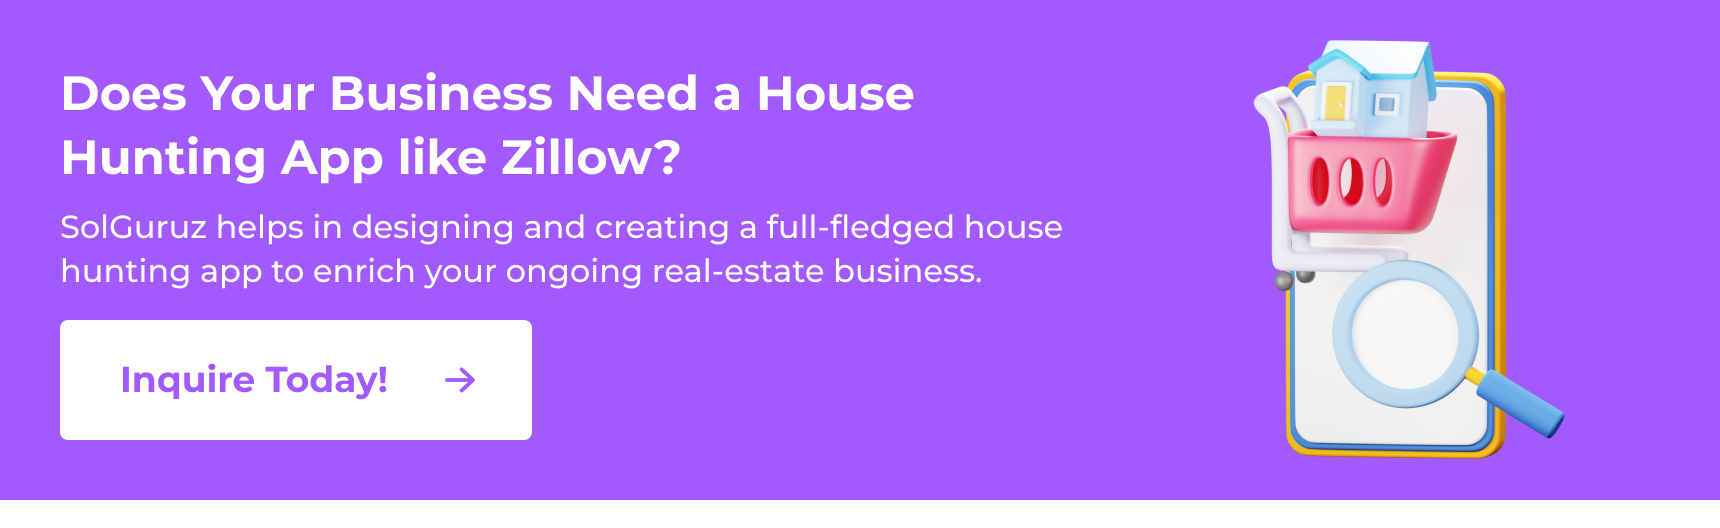 Does Your Business Need a House Hunting App like Zillow